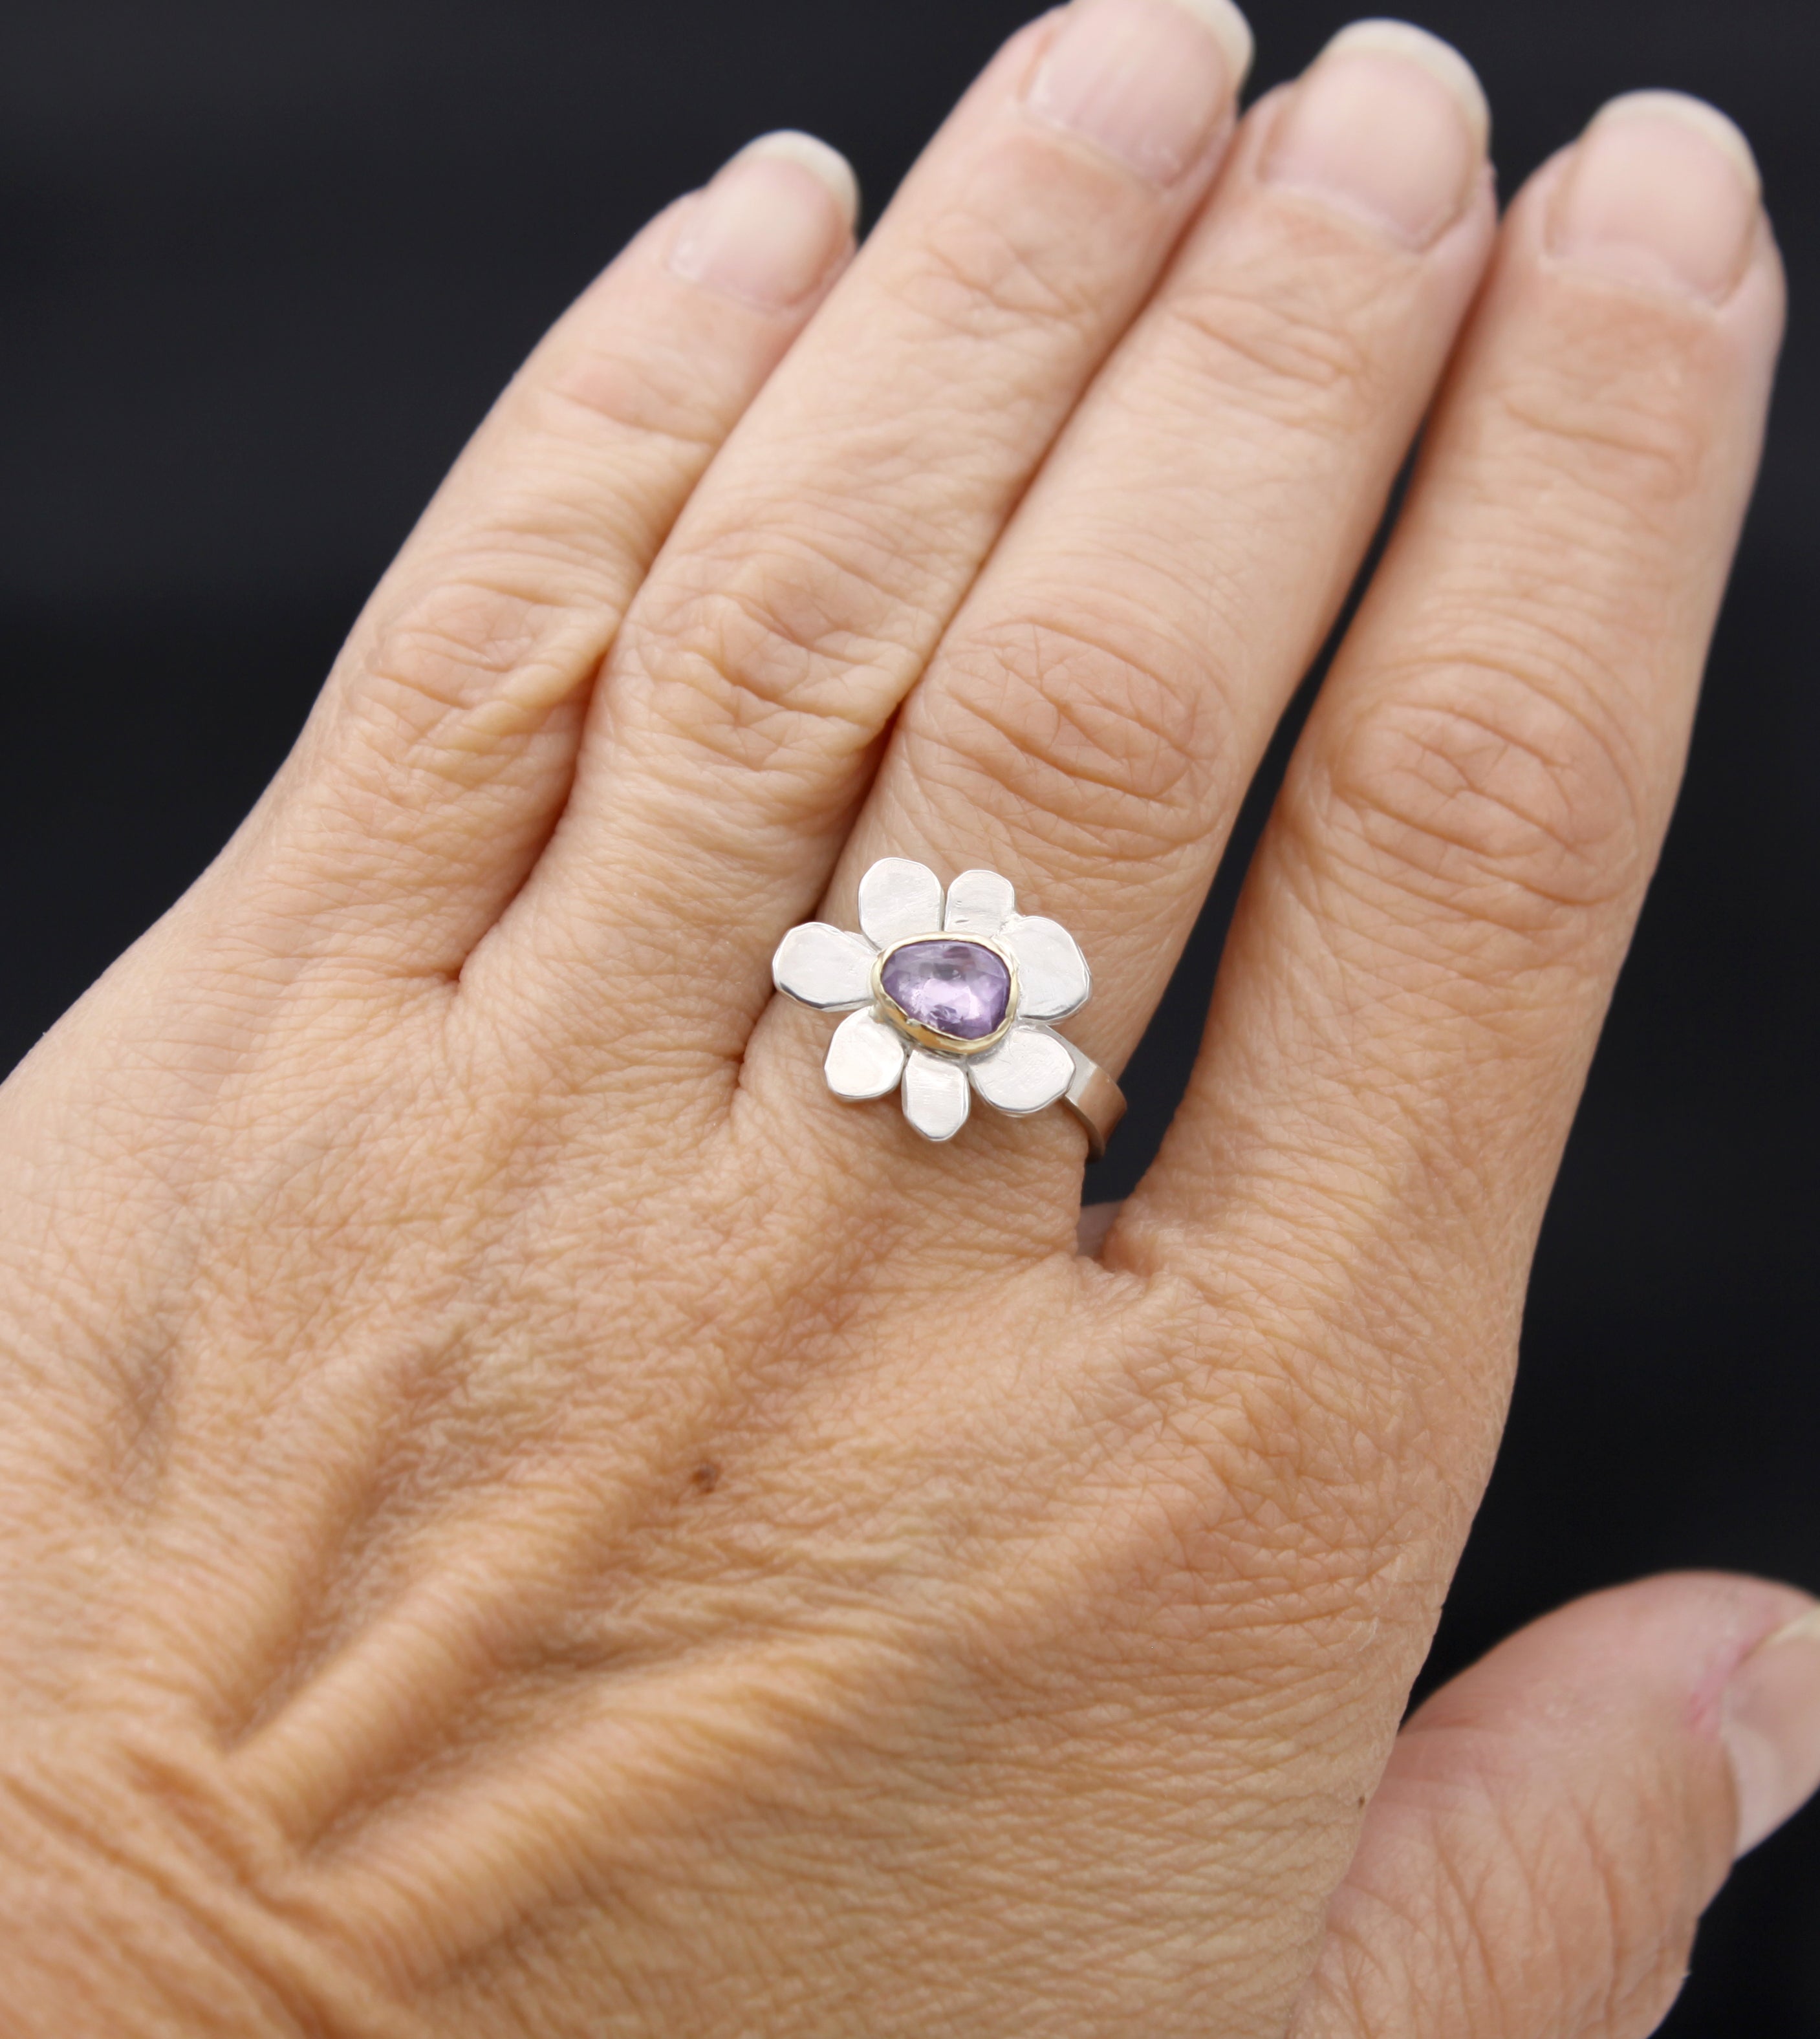 Pink Sapphire Ring, Silver Sapphire Flower Ring, One of a Kind